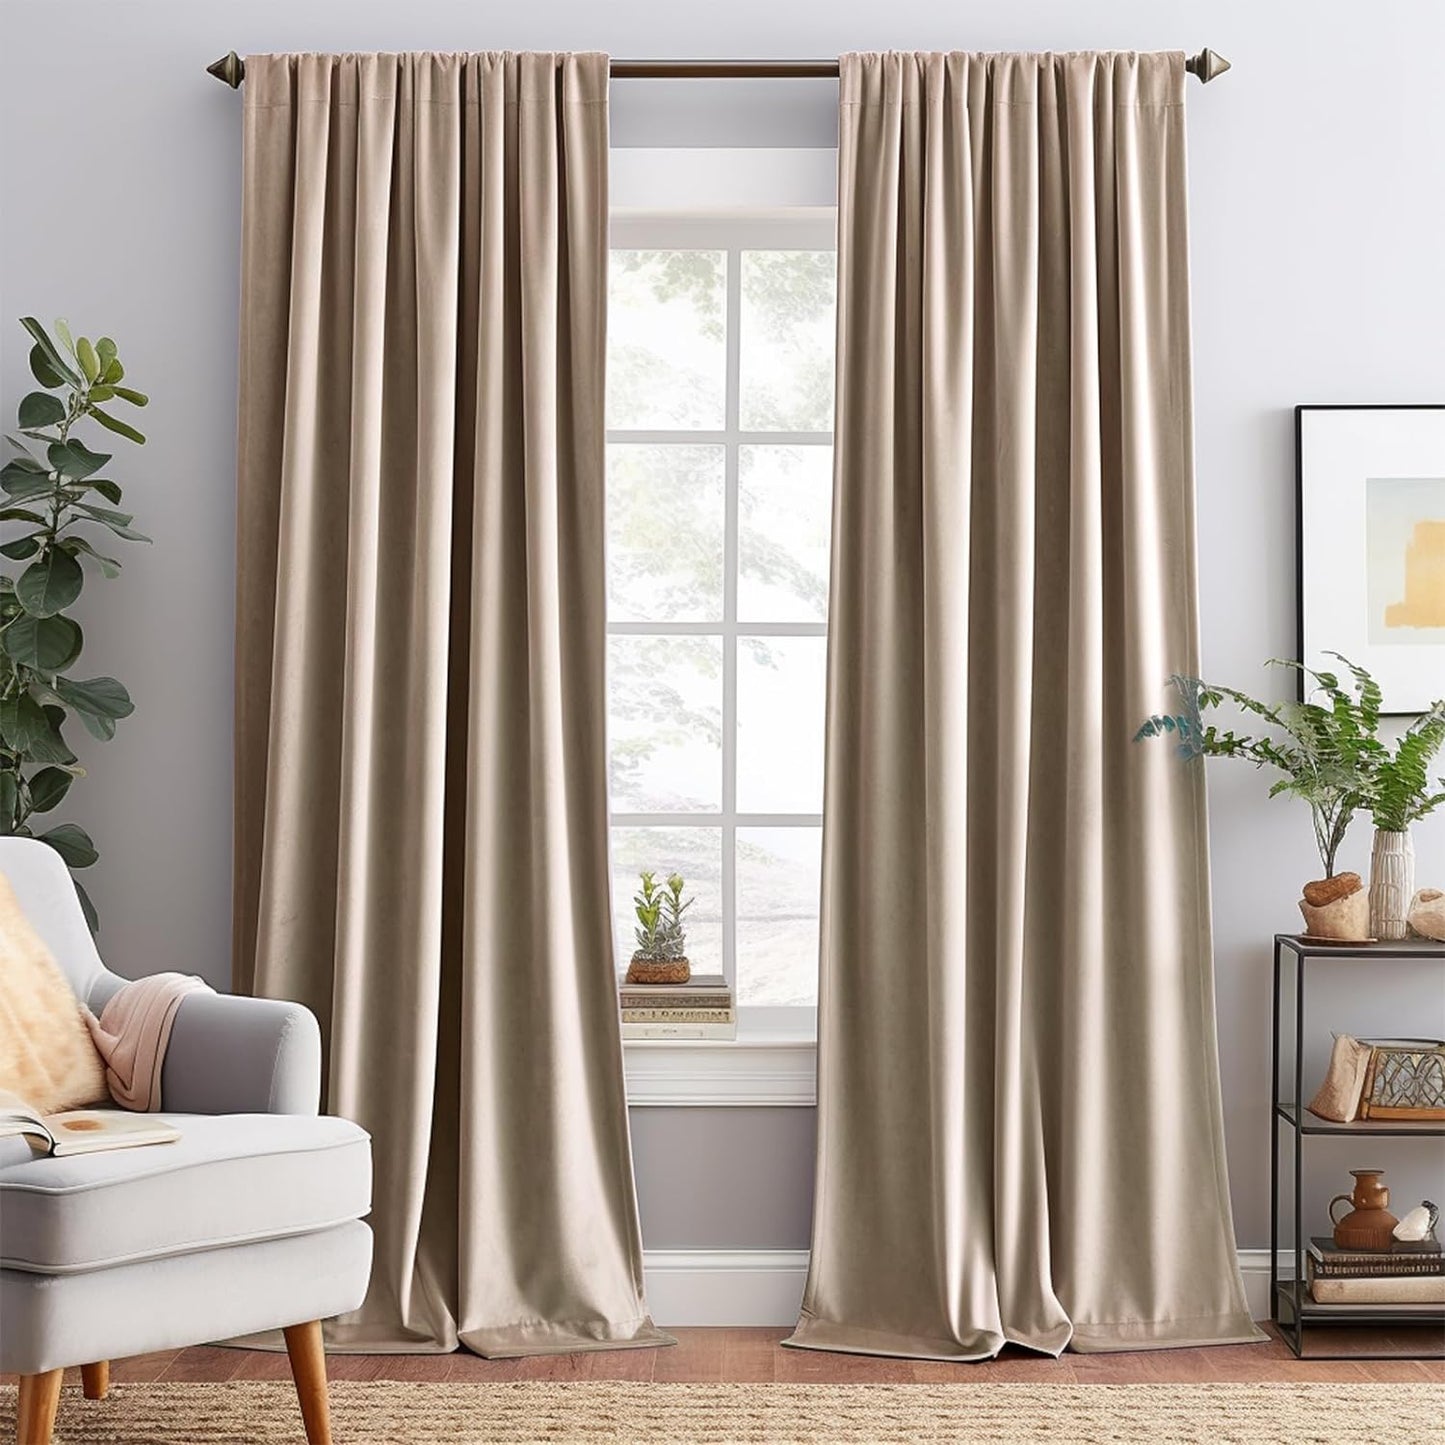 Lazzzy Velvet Blackout Curtains Brown Thermal Insulated Curtains 84 Room Darkening Window Drapes Super Soft Luxury Curtains for Living Room Bedroom Rod Pocket 2 Panels 84 Inch Long Gold Brown  TOPICK Latte W52 X L90 